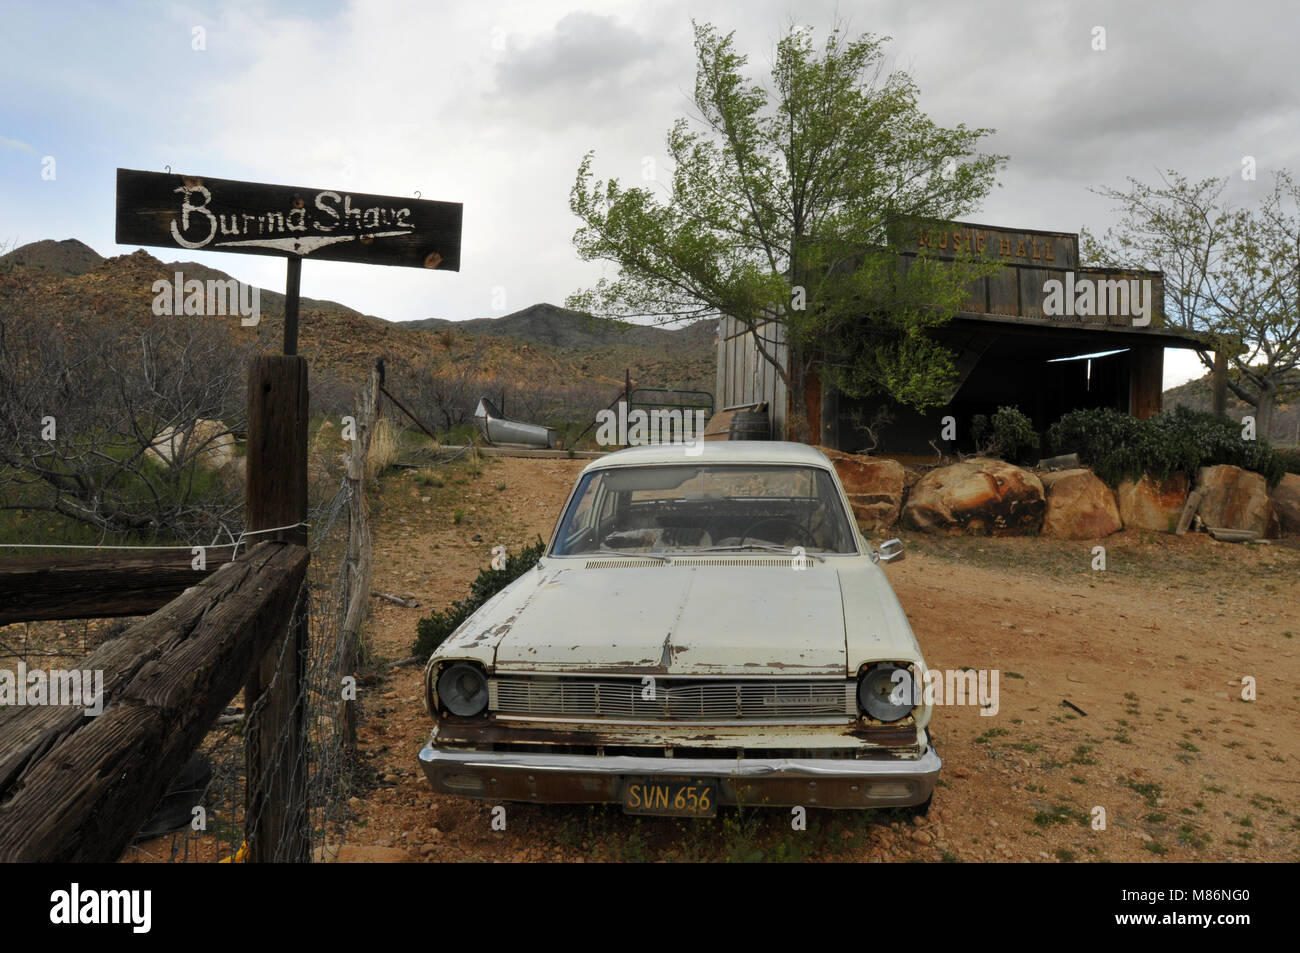 An old car and Burma-Shave advertising sign stand near a weathered wooden building behind the Hackberry General Store, a Route 66 landmark in Arizona. Stock Photo